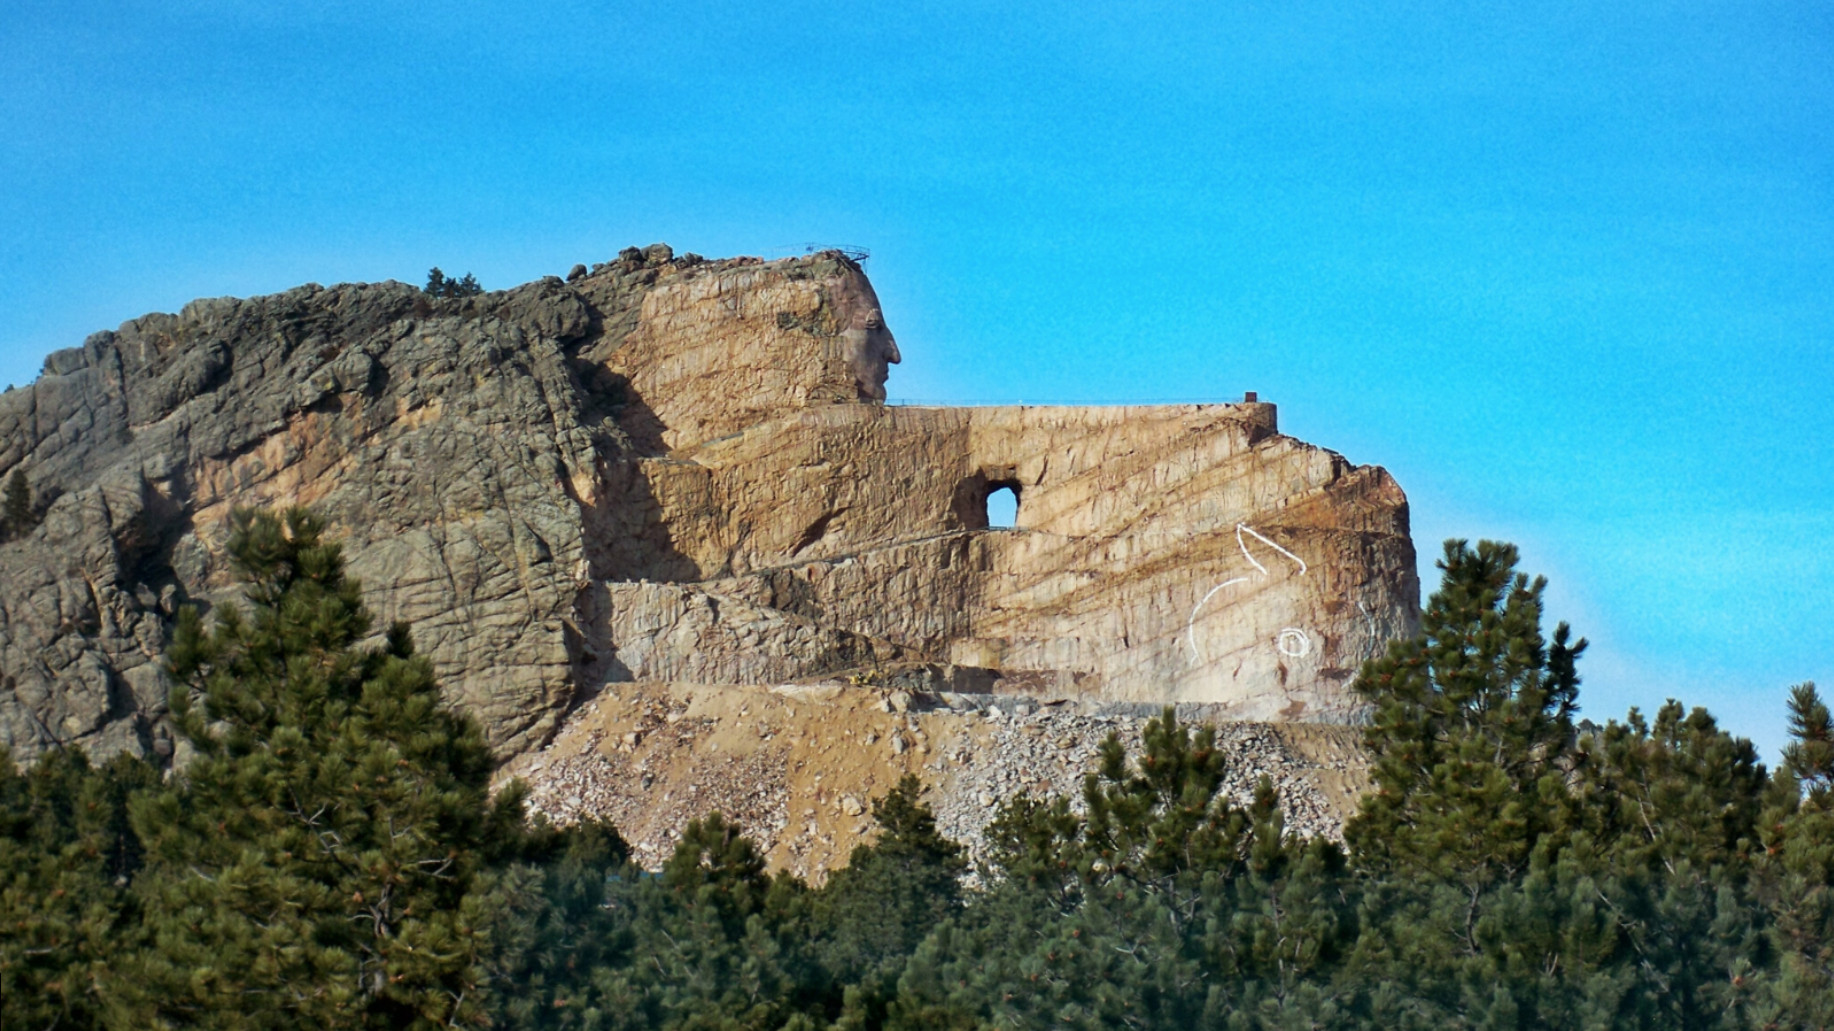 The Crazy Horse Memorial is one of the world’s largest sculptural undertakings. A mountain monument memorial of Lakota leader Crazy Horse is under construction on privately held land in the Black Hills in South Dakota, United States.